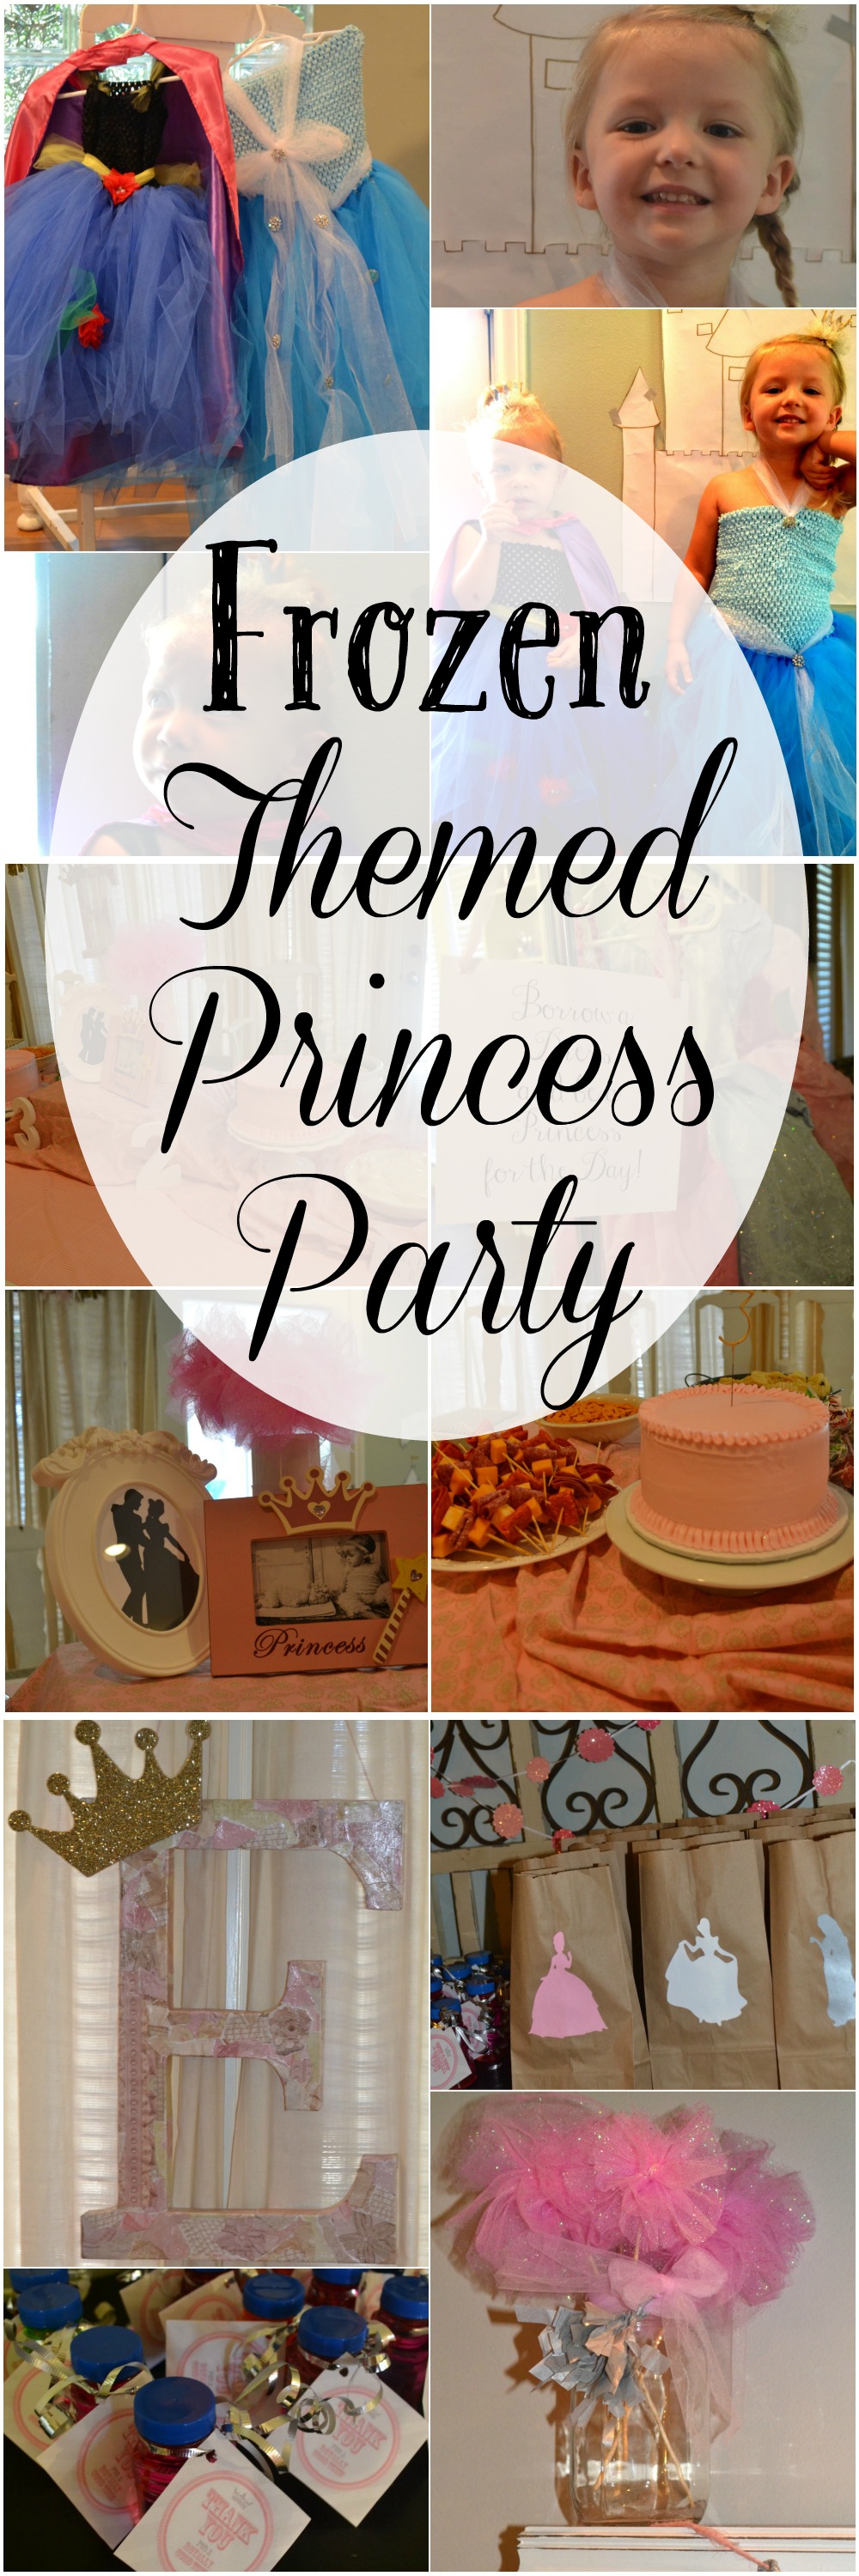 This Frozen Themed Birthday party is full of all things Anna, Elsa, Olaf and more Princess Party Fun. Great tips and ideas for the perfect Frozen Birthday party!